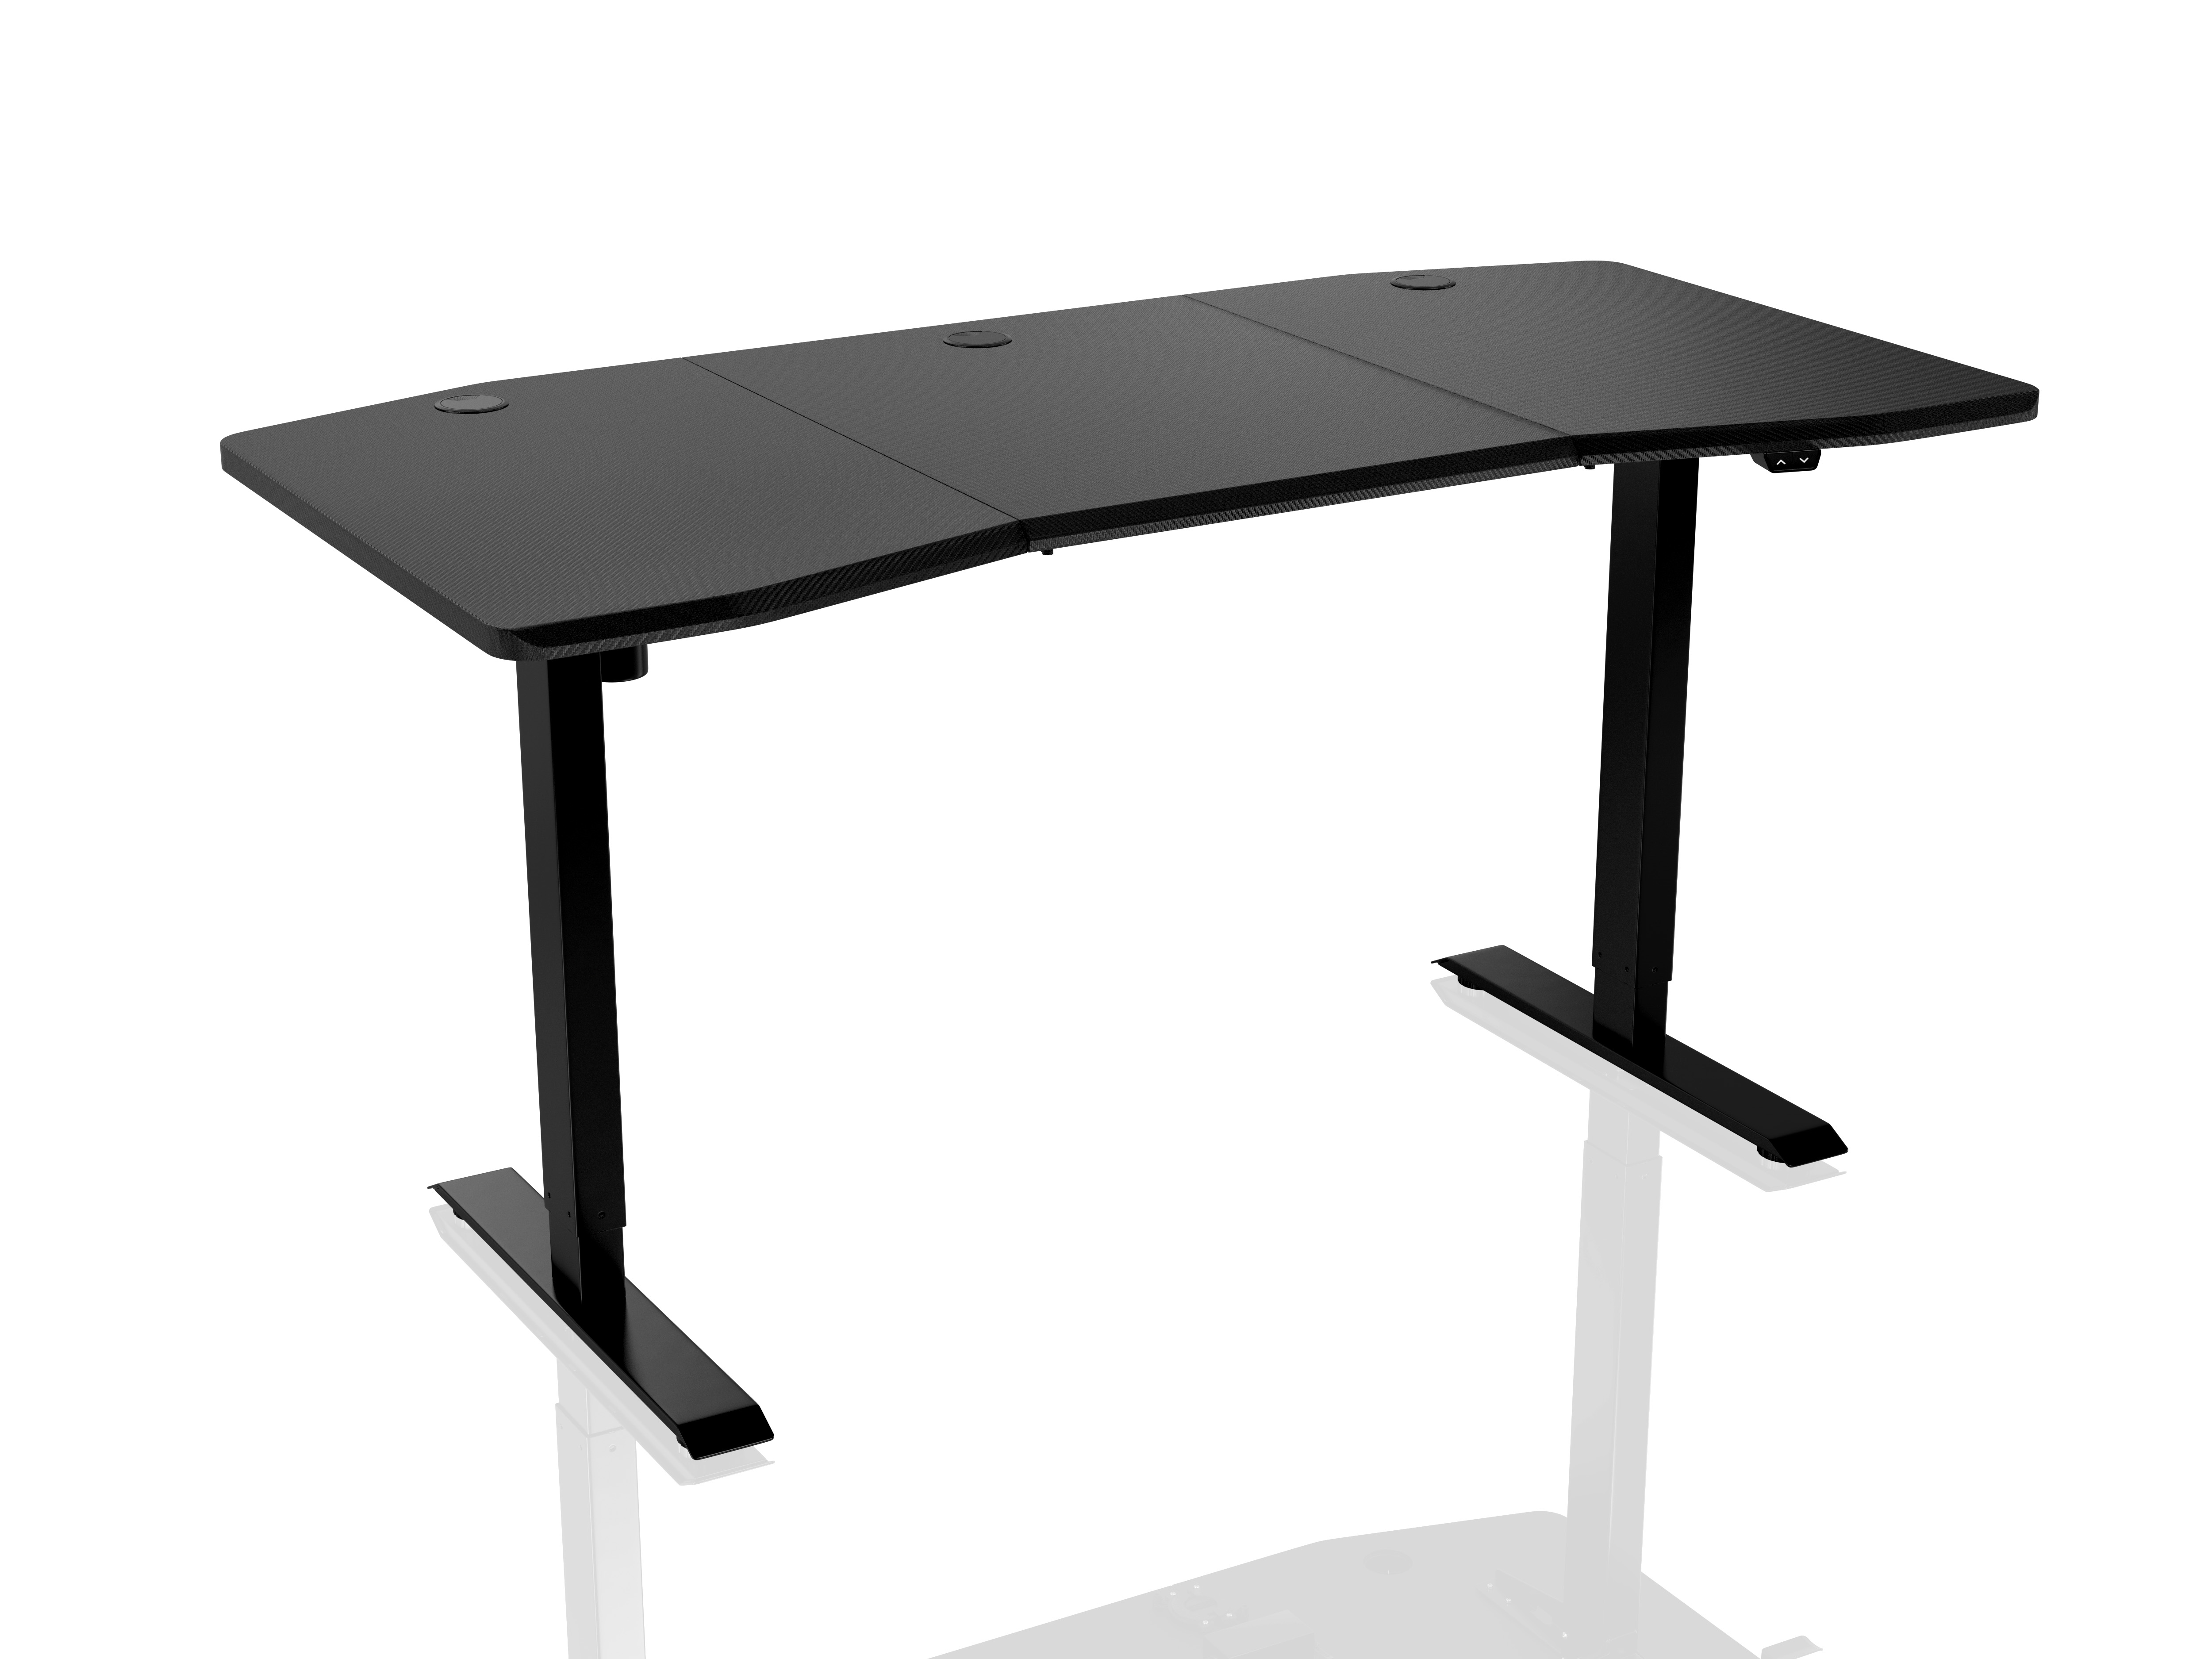 Nitro Concepts - Gaming Desk D16E Carbon Red - electrically adjustable height